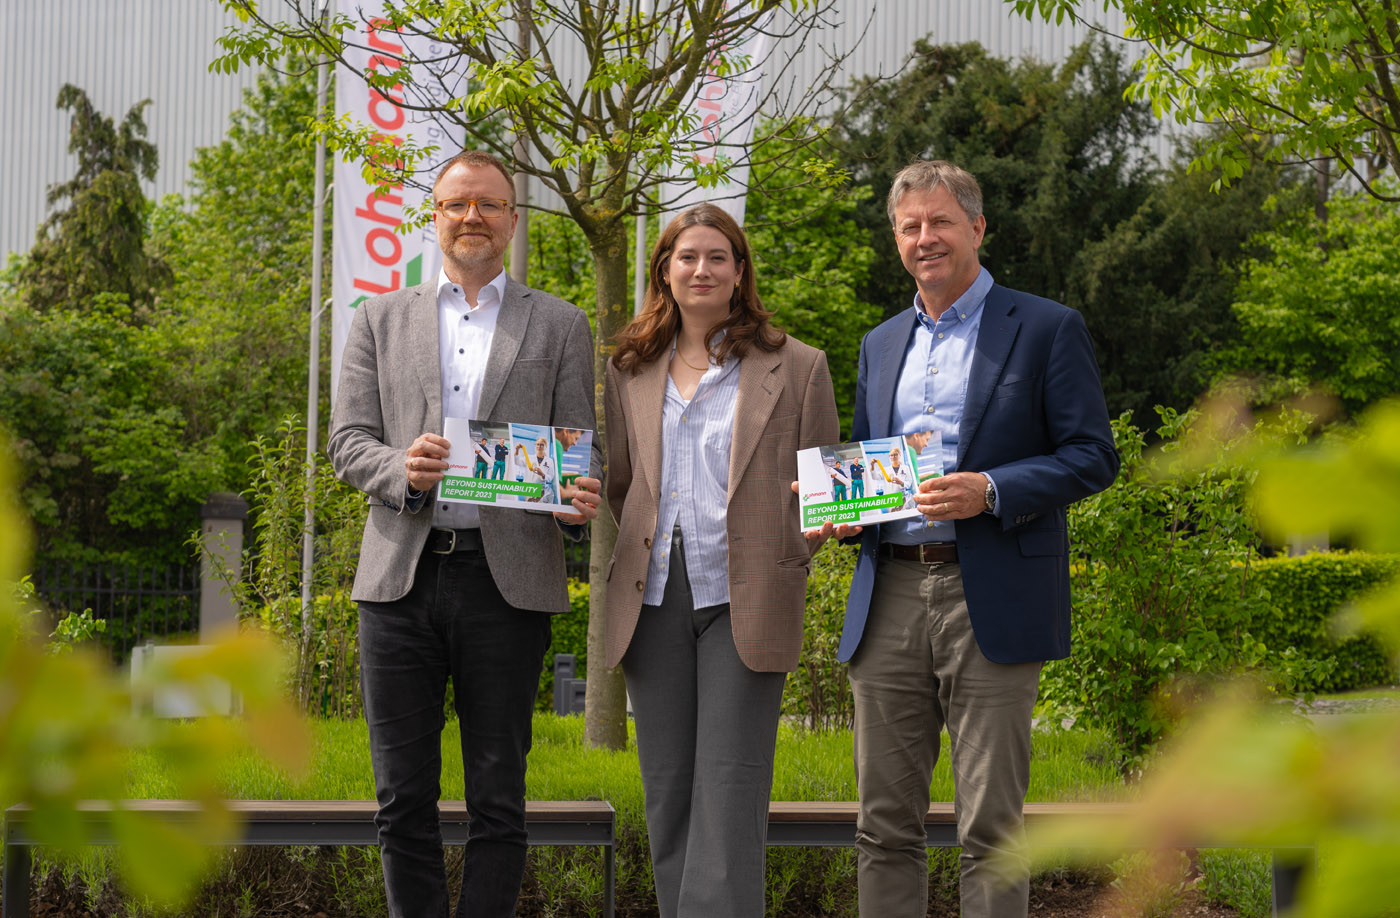 Lohmann presents its first comprehensive sustainability report and celebrates recent awards 